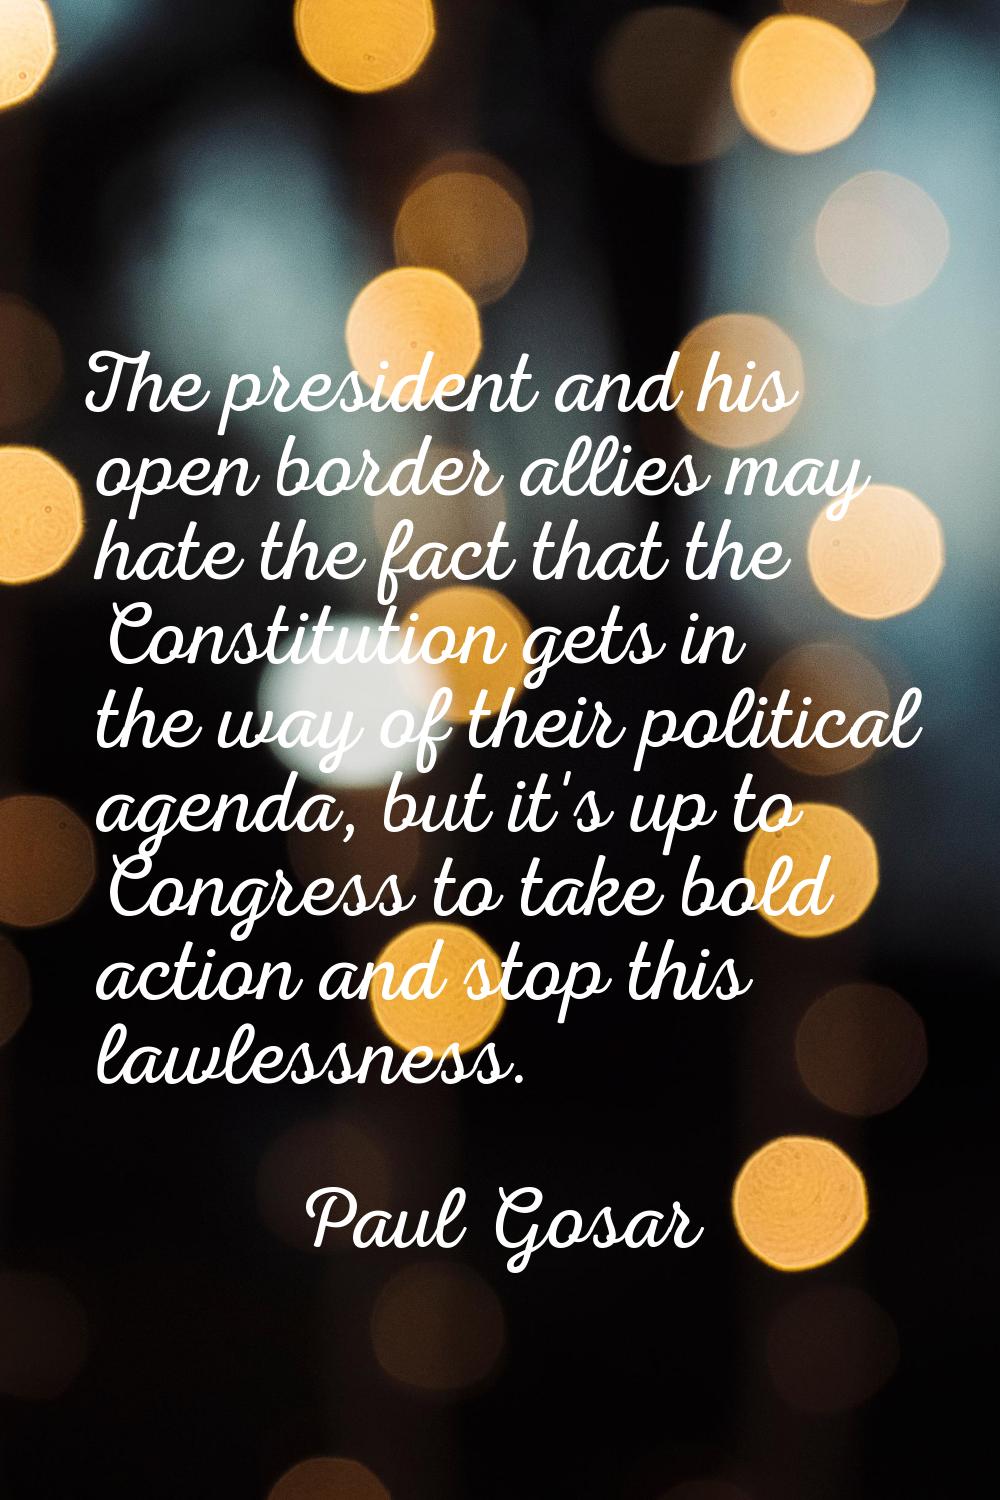 The president and his open border allies may hate the fact that the Constitution gets in the way of